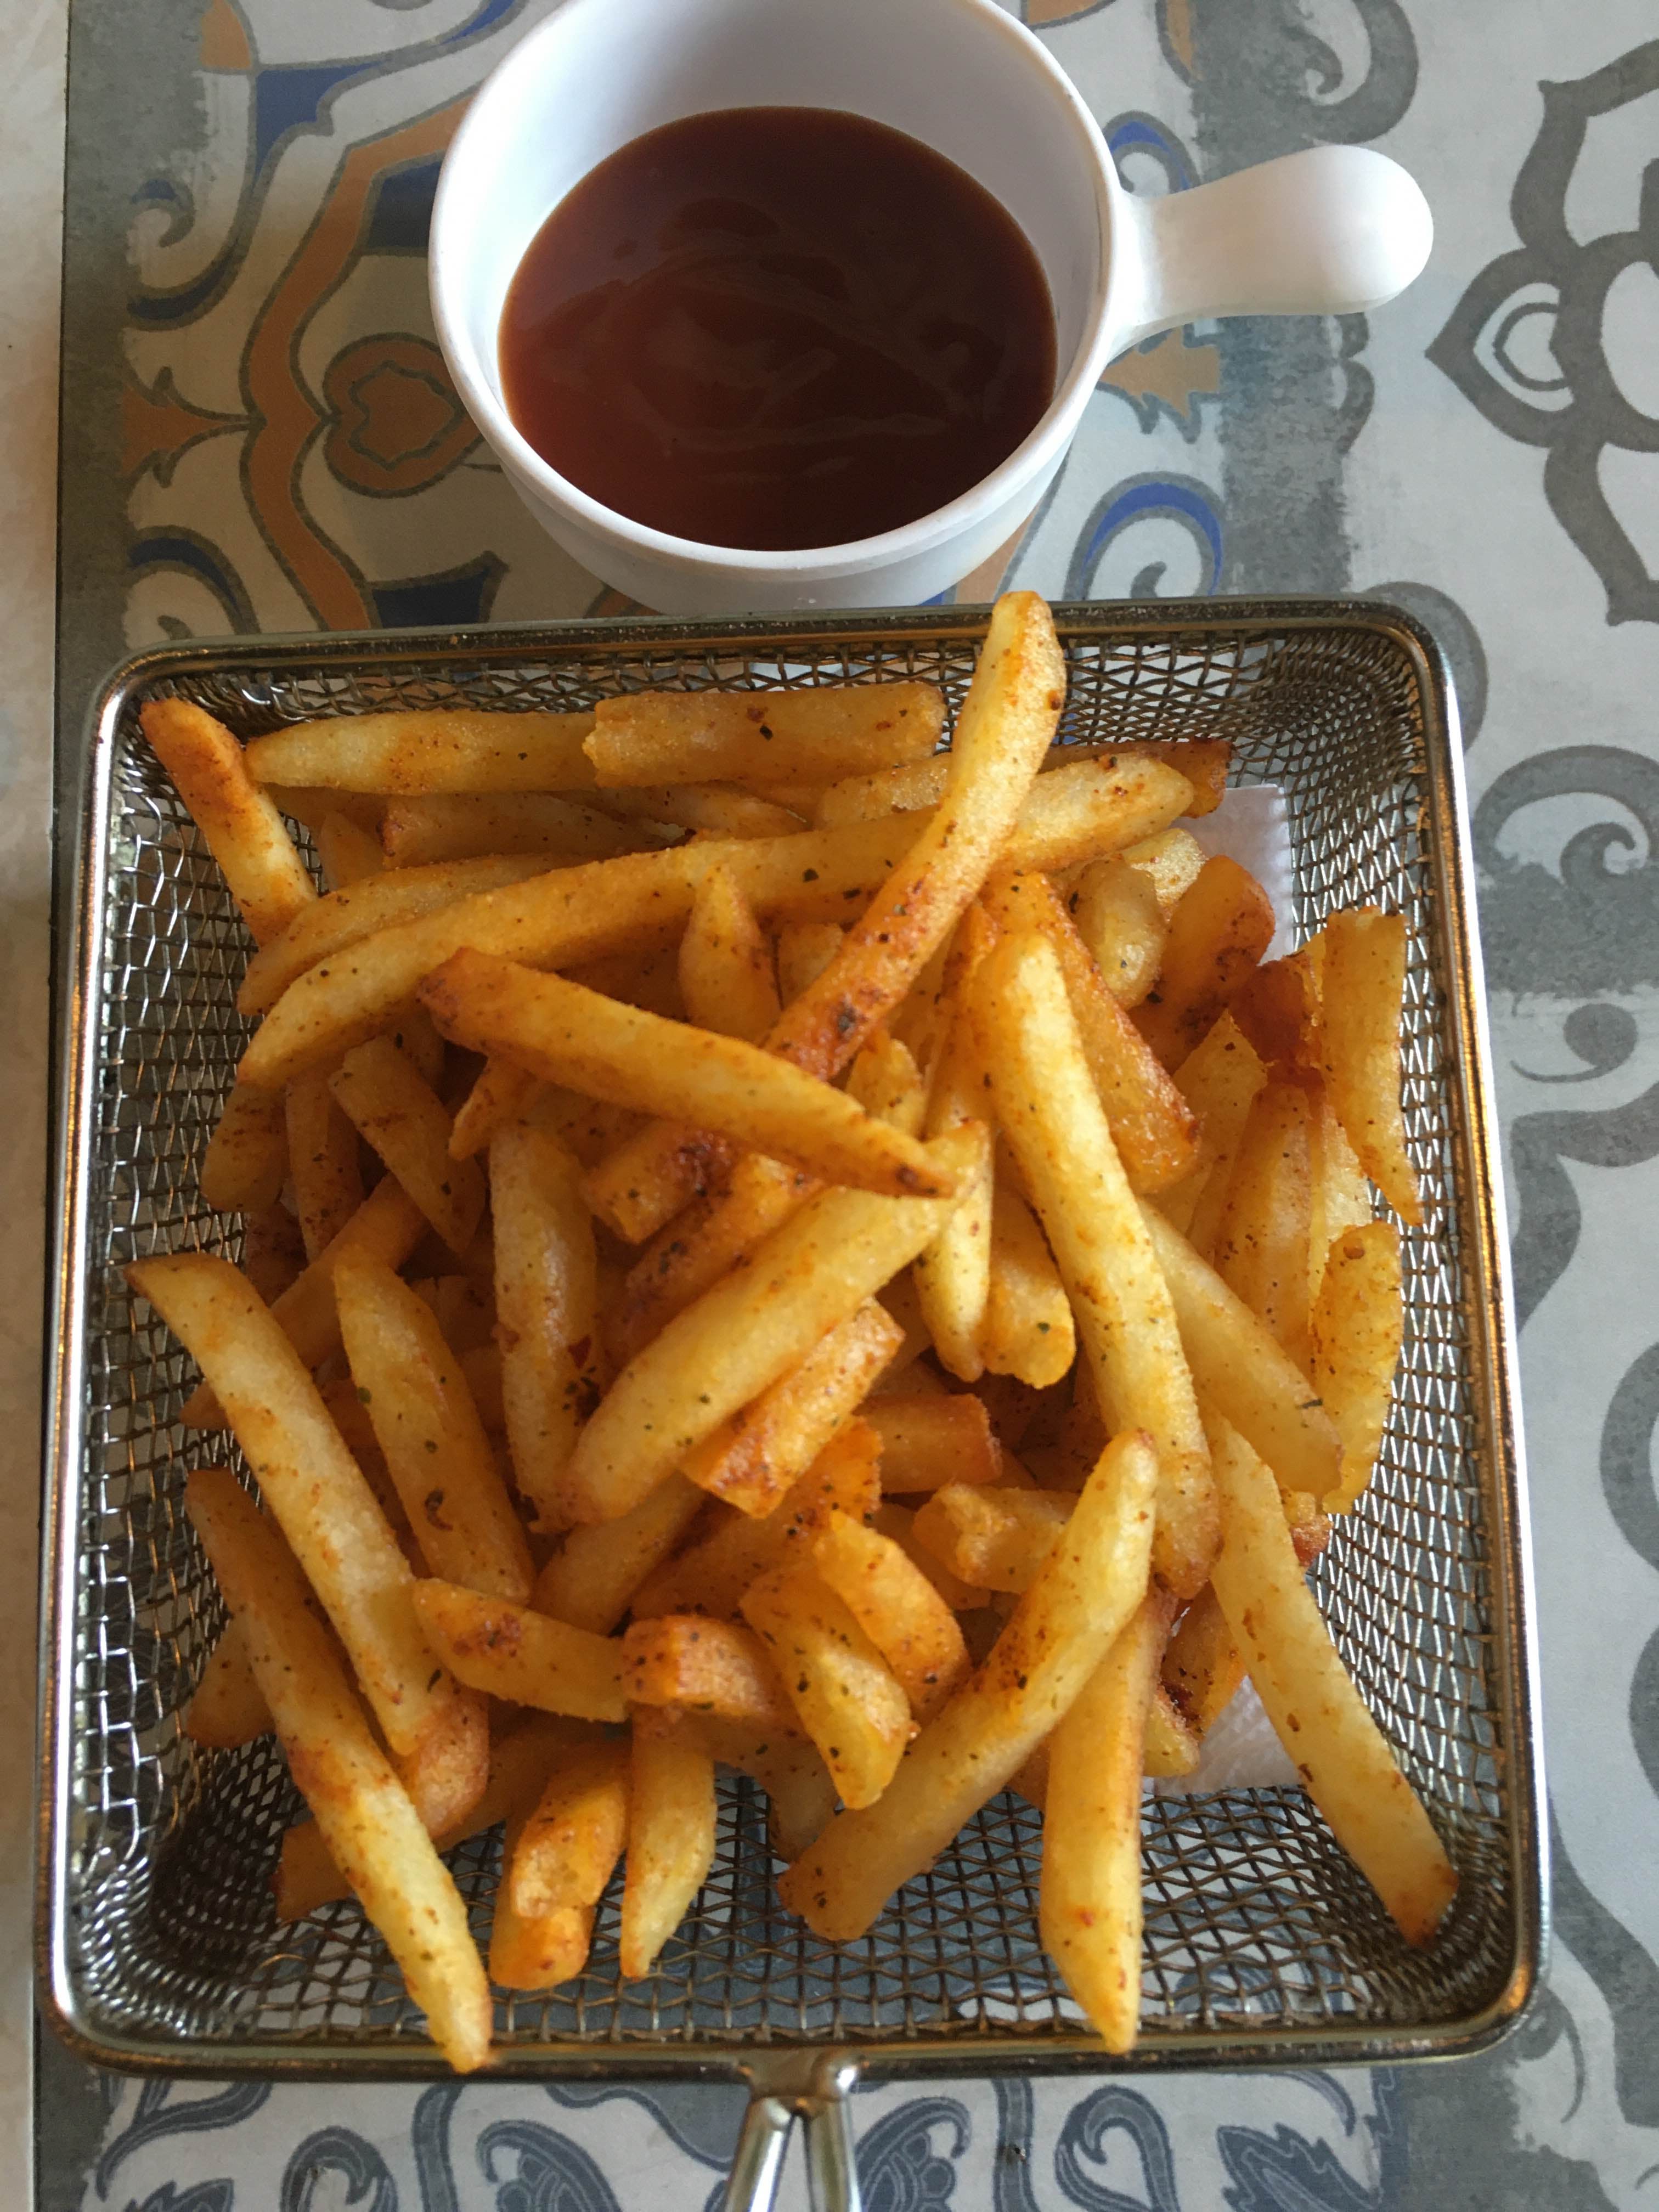 Dish,Food,French fries,Junk food,Fried food,Fast food,Cuisine,Deep frying,Side dish,Kids' meal